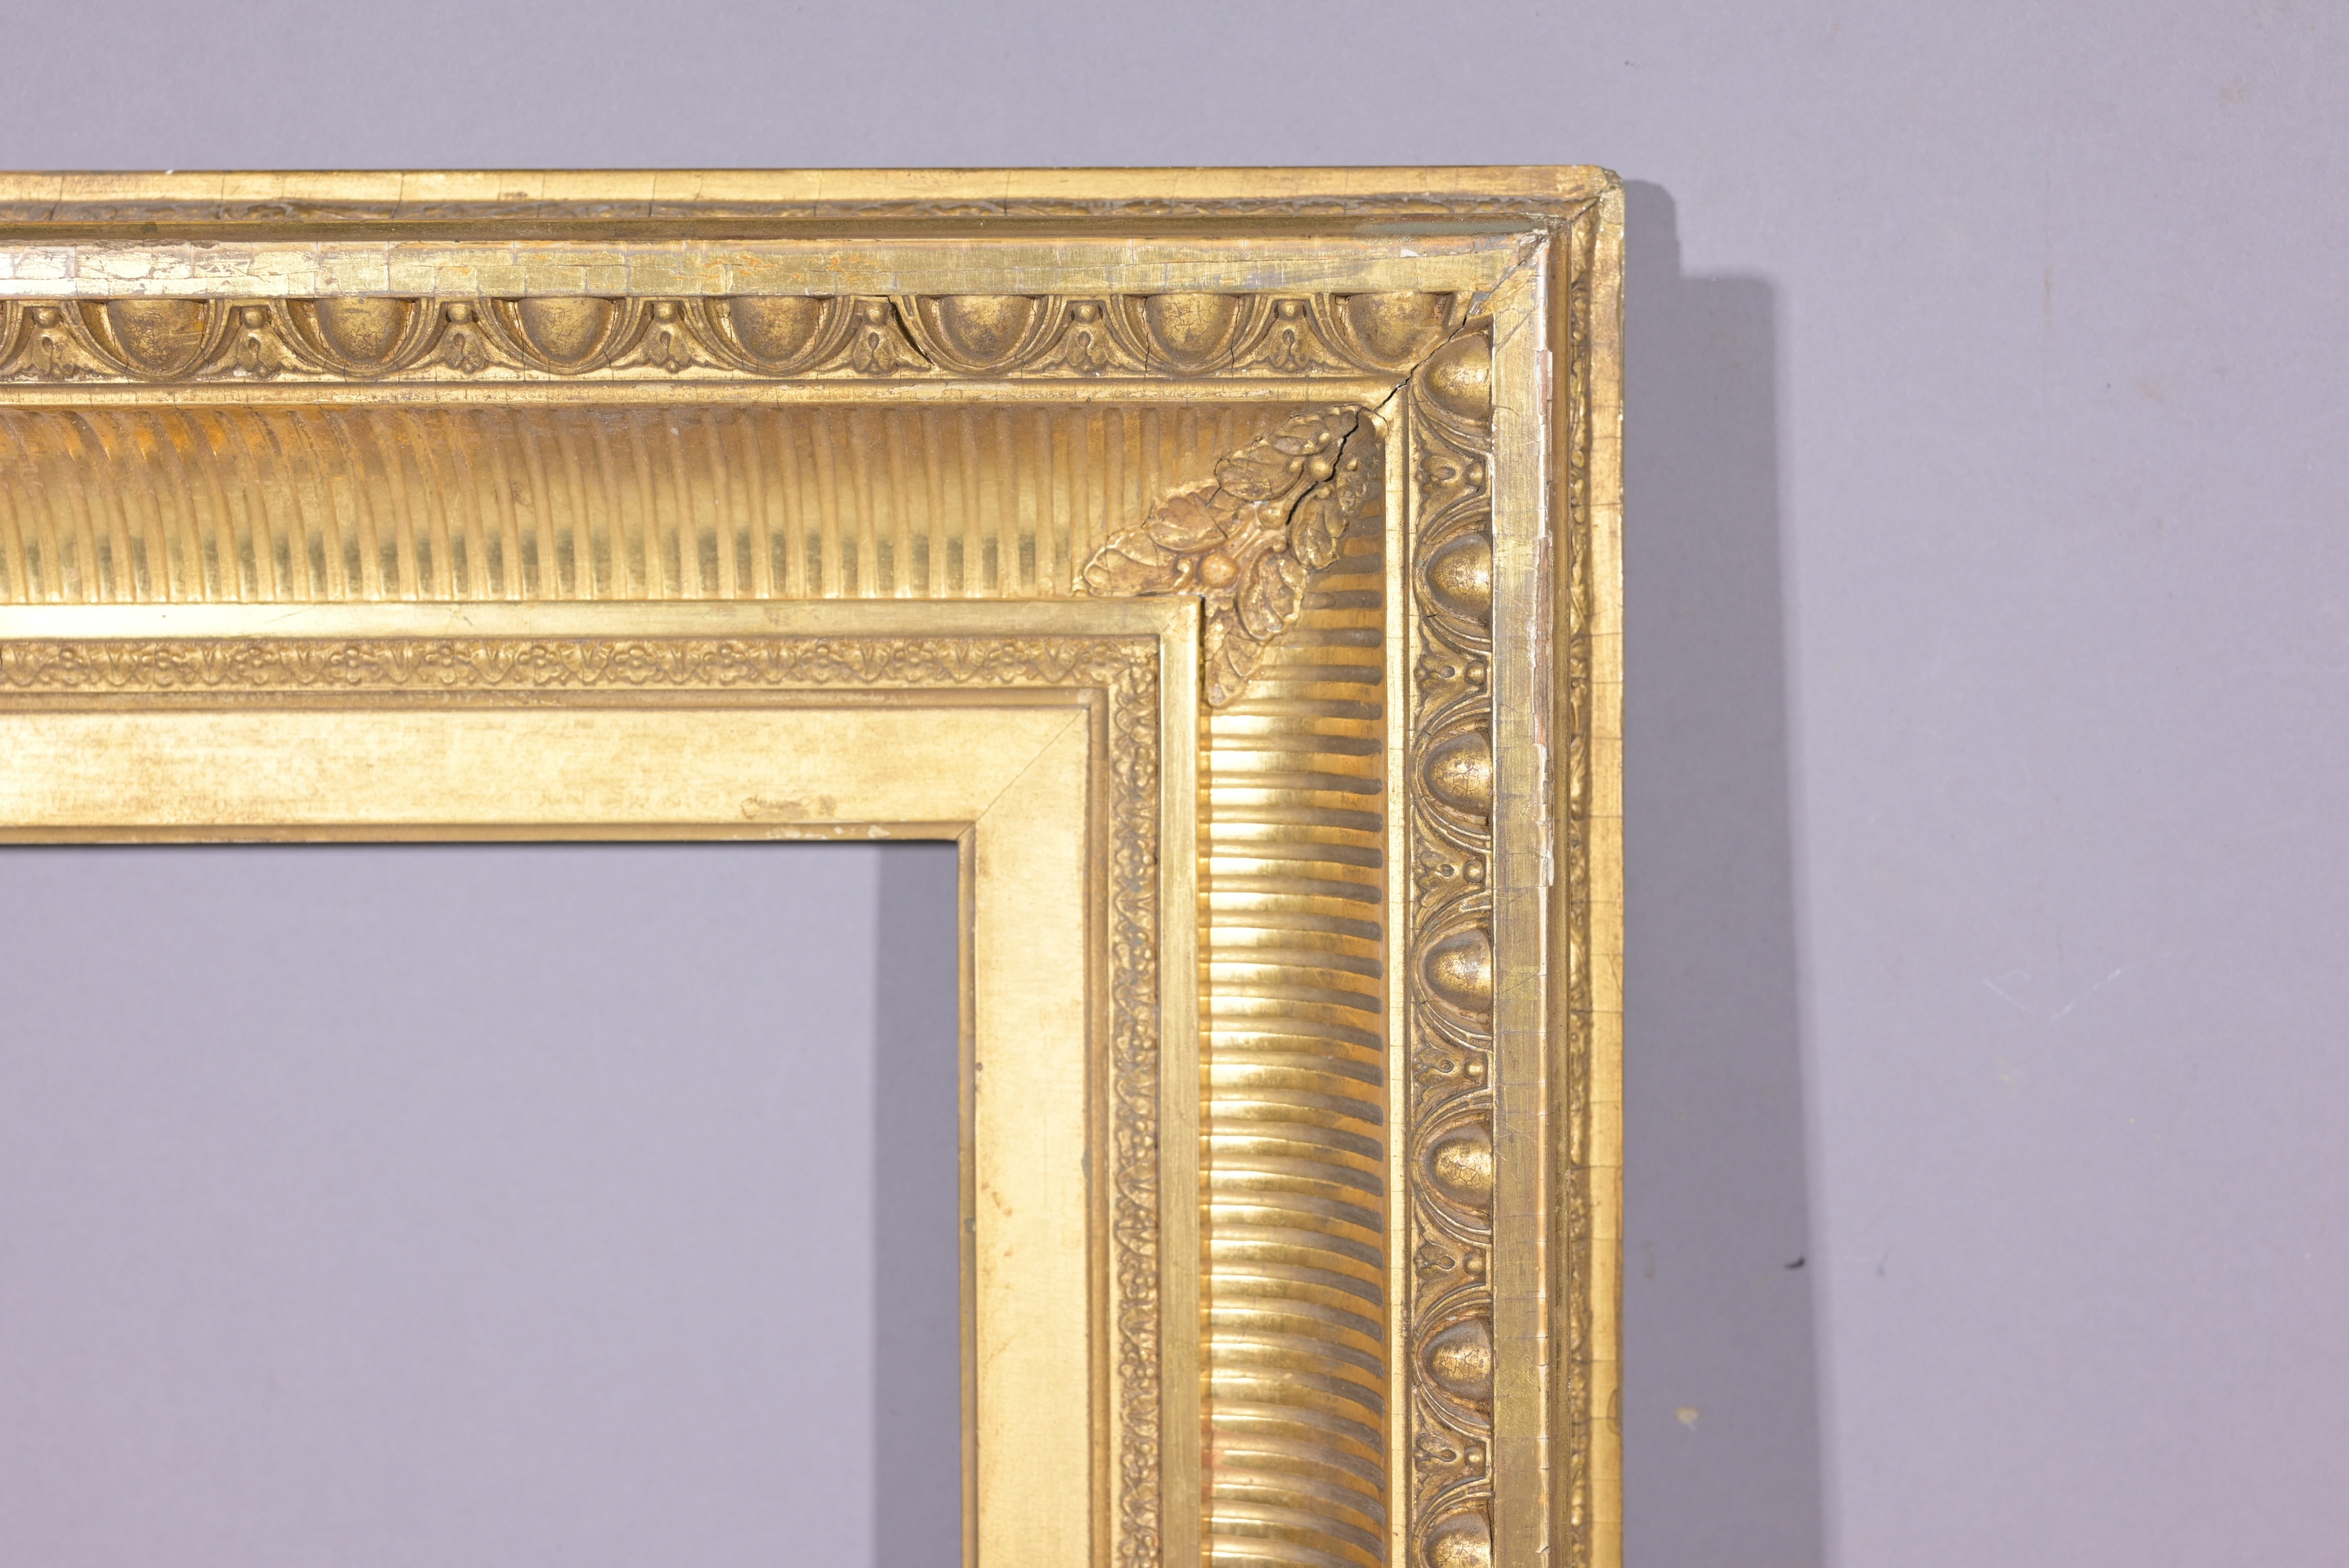 American c.1870's Fluted Cove Frame - 17.5 x 10 - Image 3 of 8